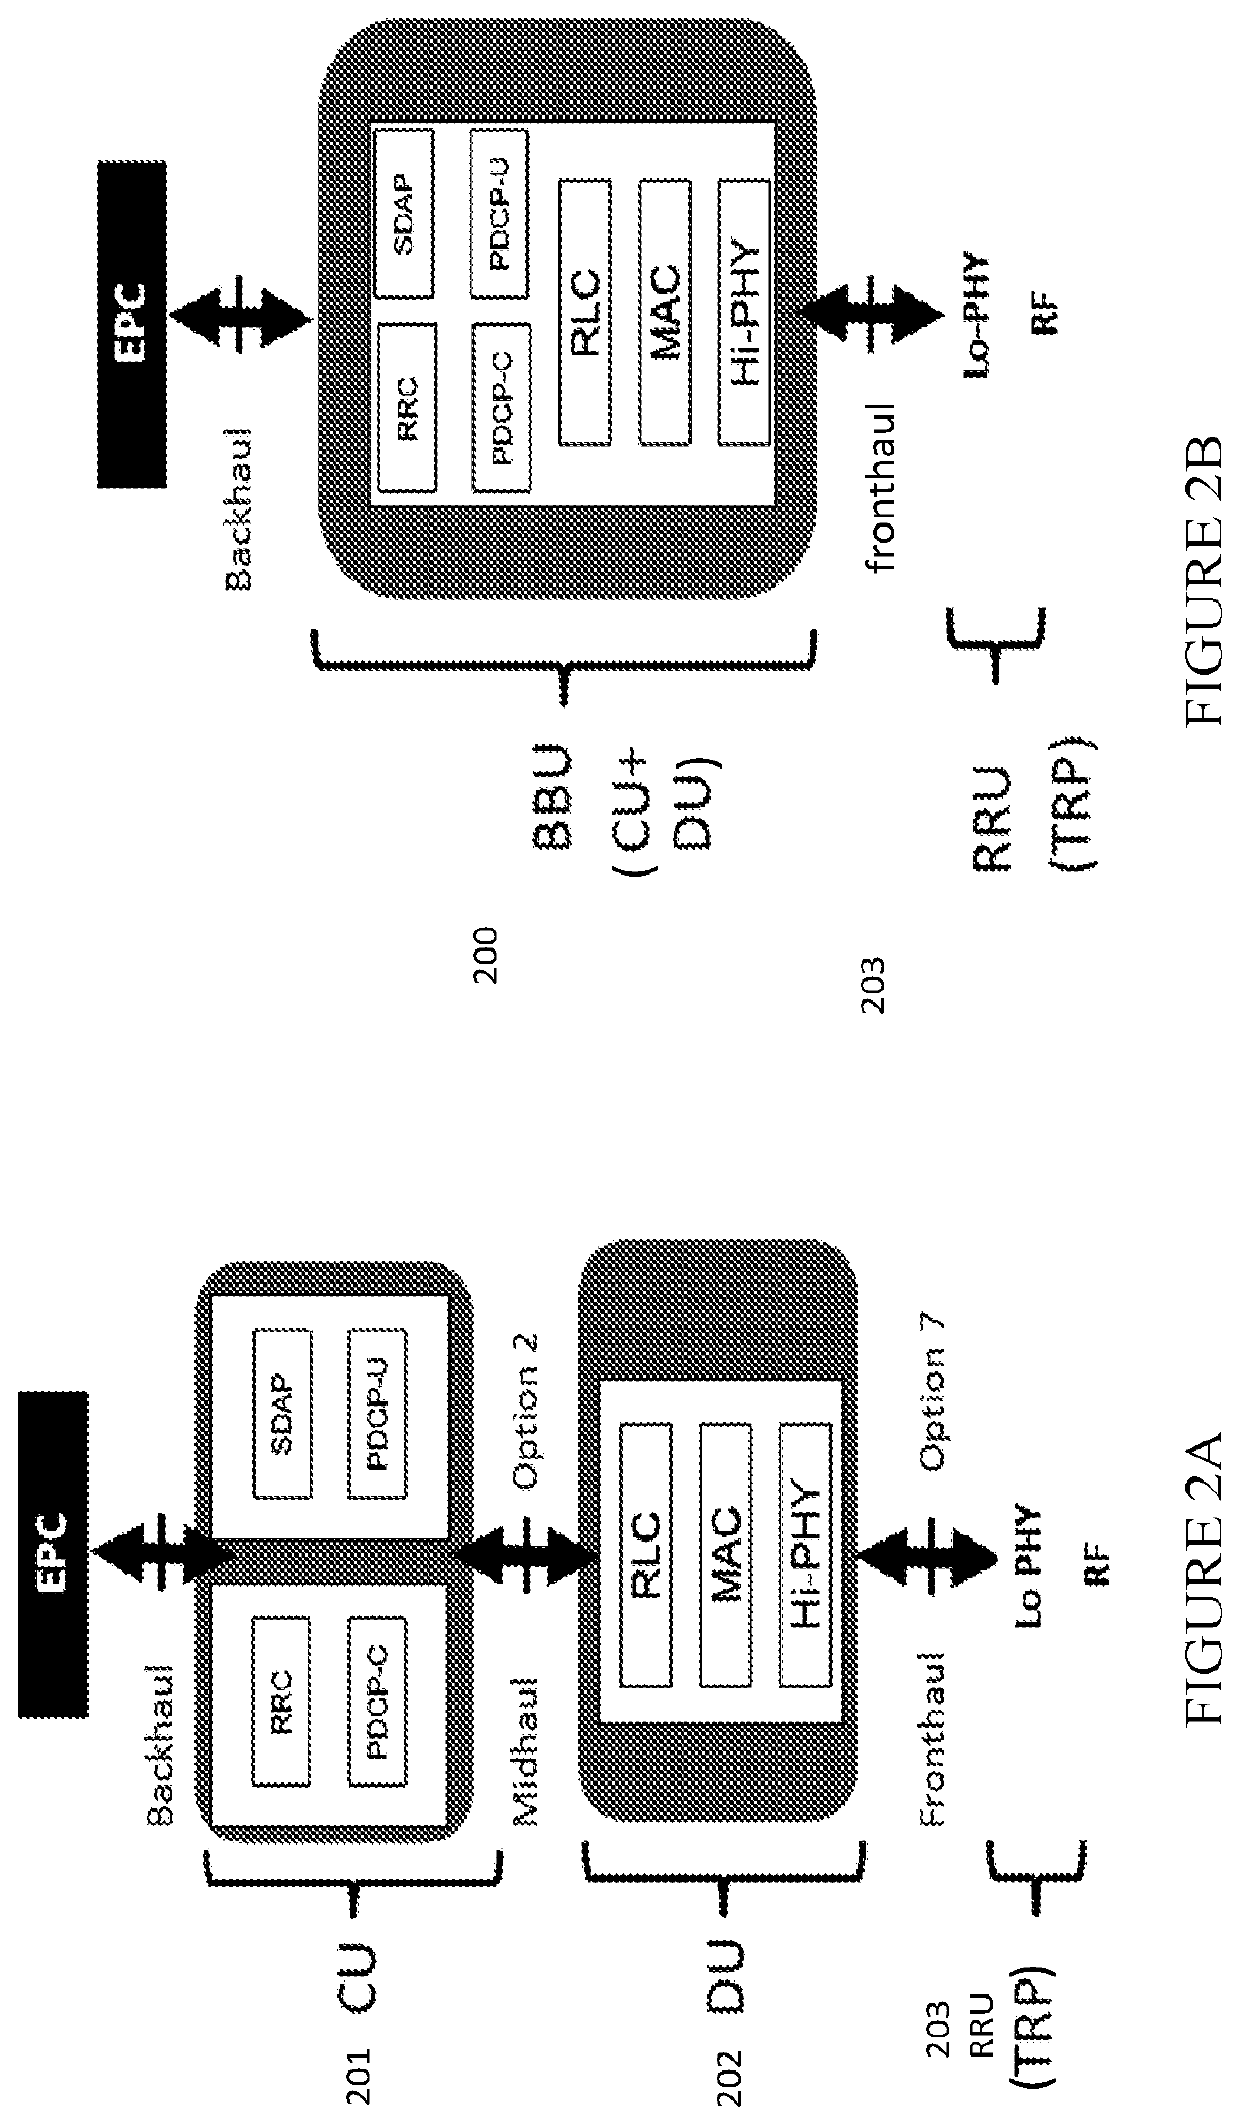 Method and apparatus for flexible fronthaul physical layer split for cloud radio access networks